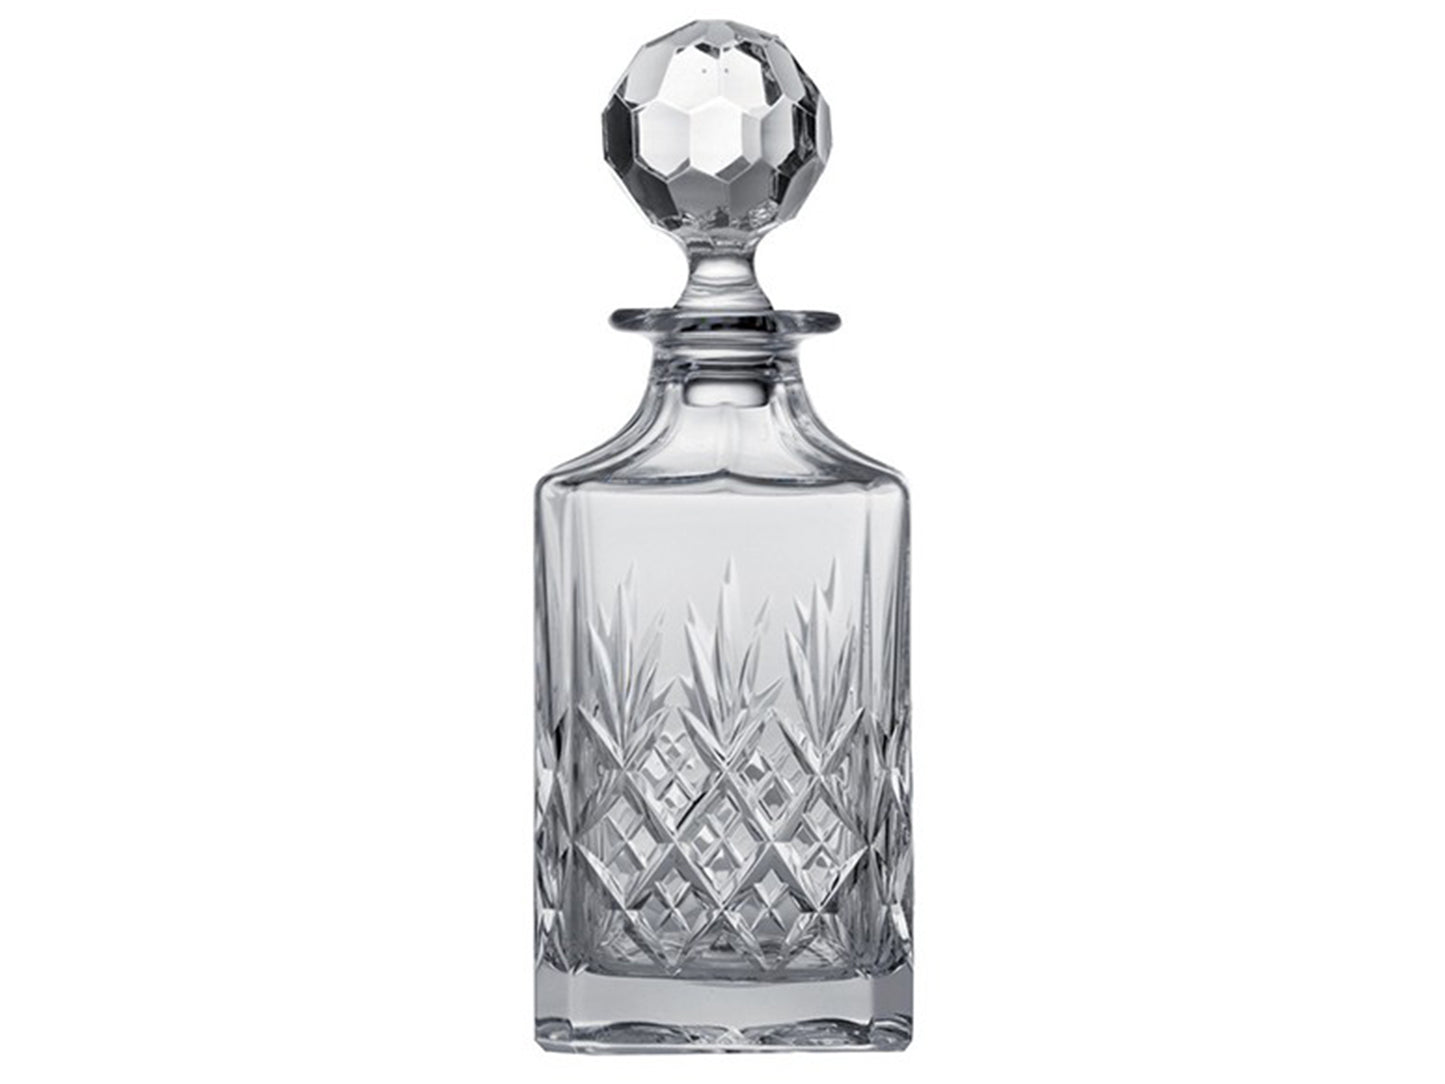 A crystal decanter with a square body, featuring the triple flicked Edinburgh cut, topped with a crystal golf-ball style stopper